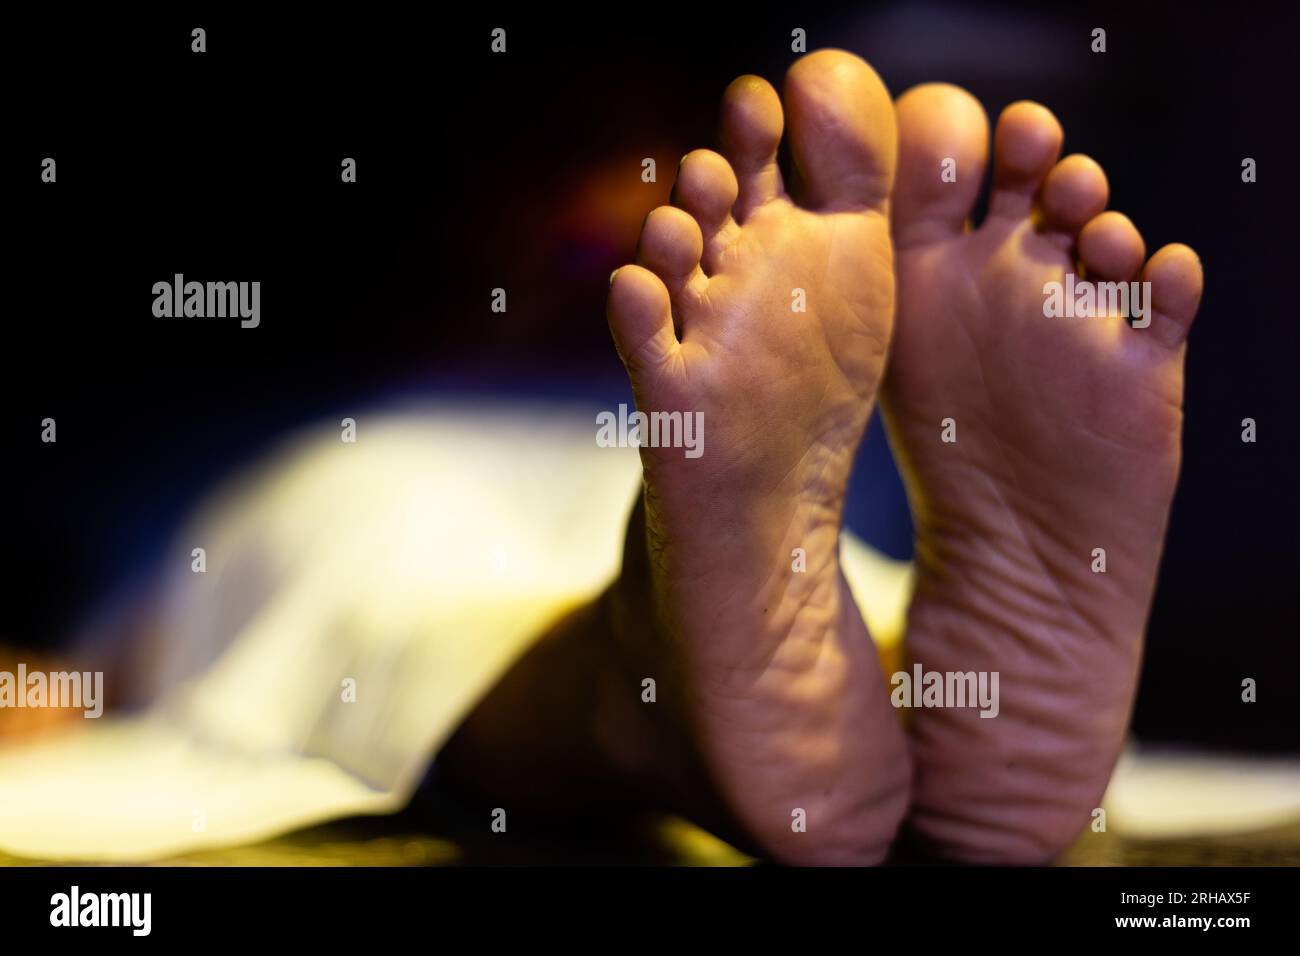 Feet of an Indian or Asian female dead body lying on floor in a dark room Stock Photo